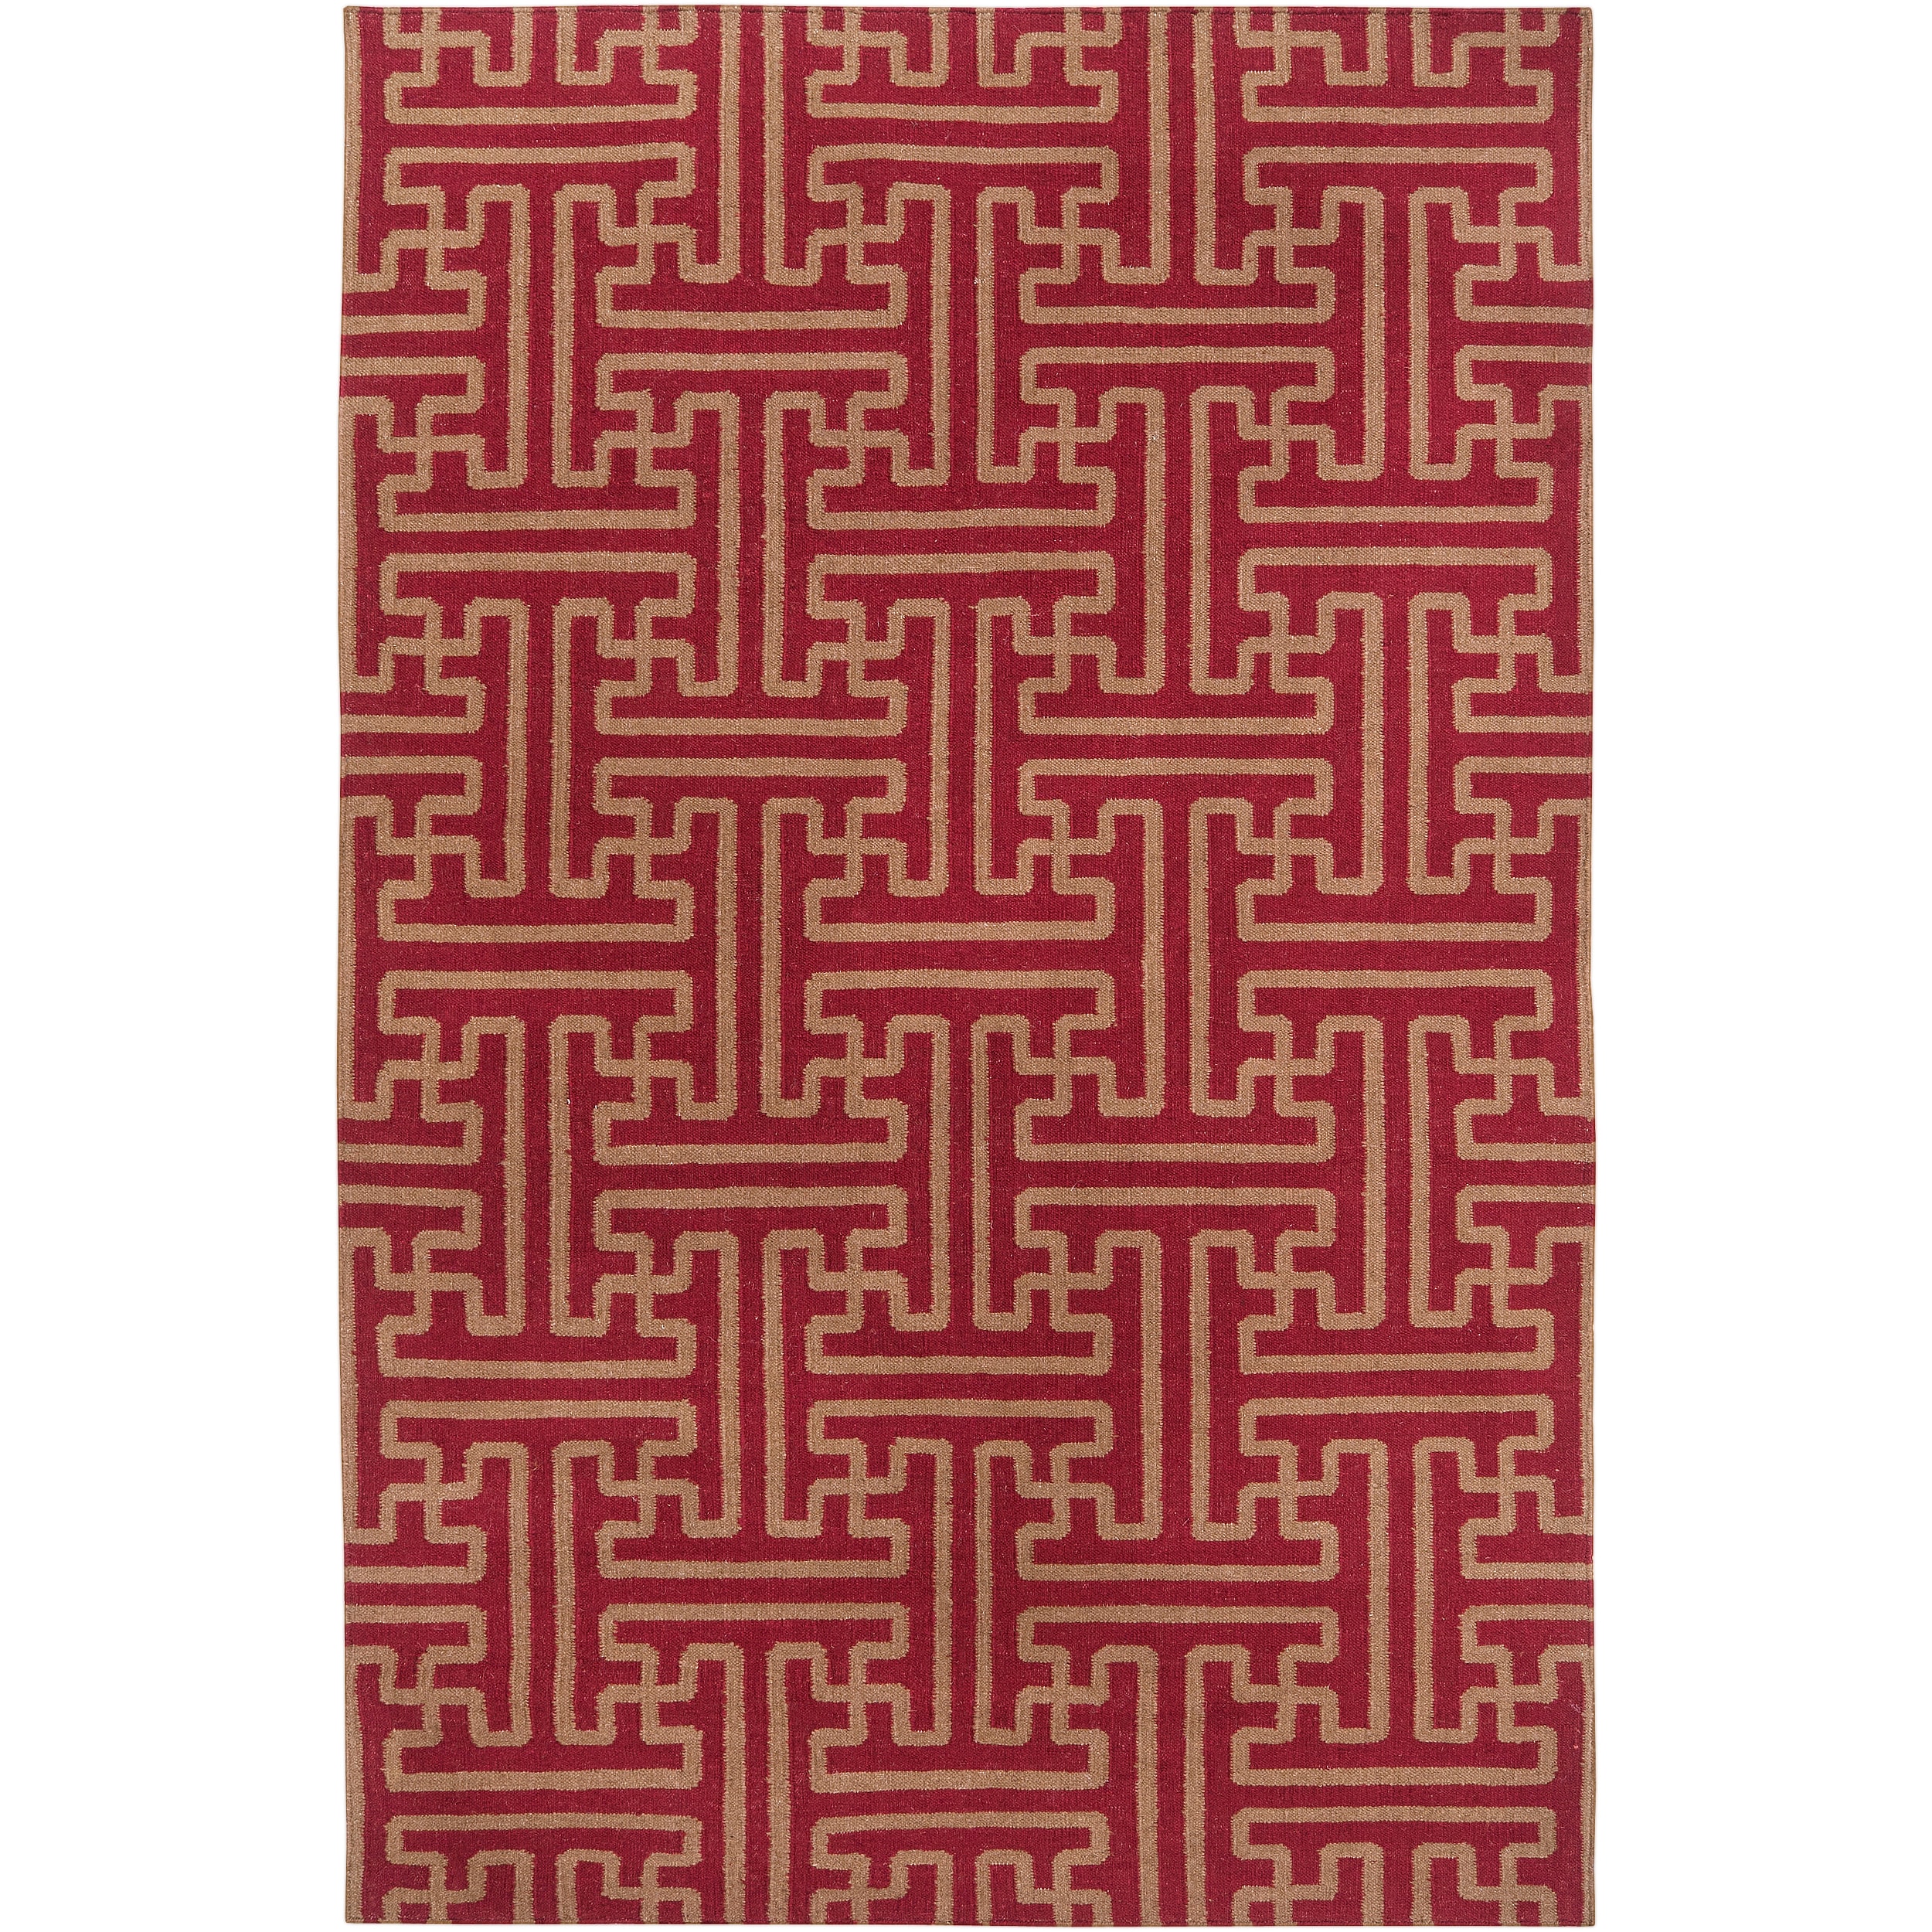 Hand woven Red Alba Wool Rug (8 X 11)